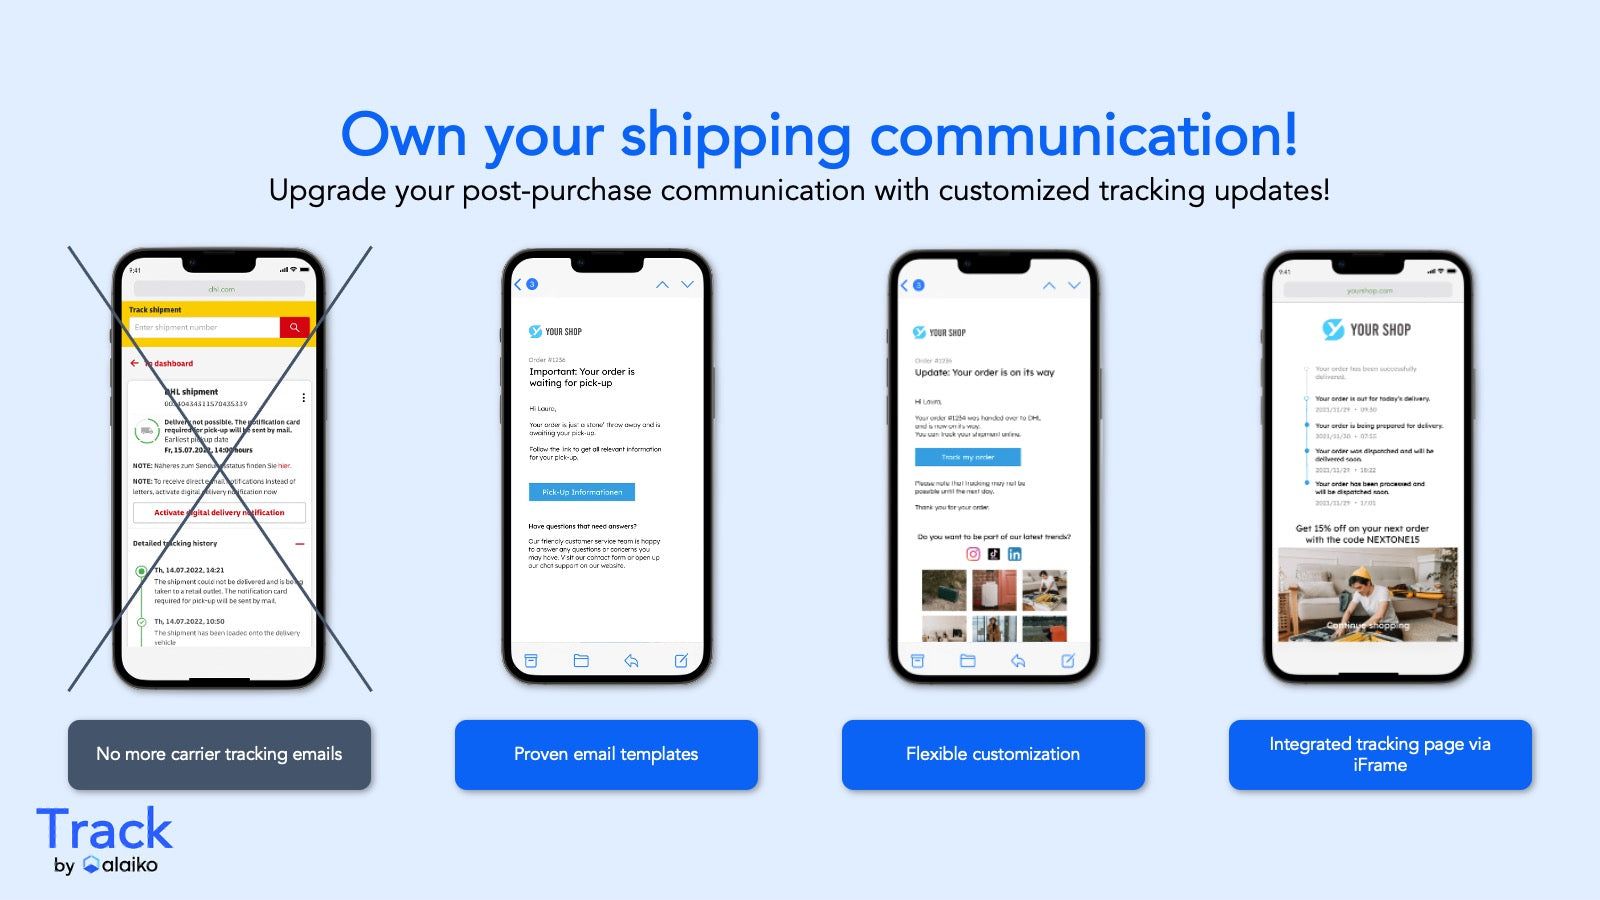 Fully customized and branded shipping communication templates